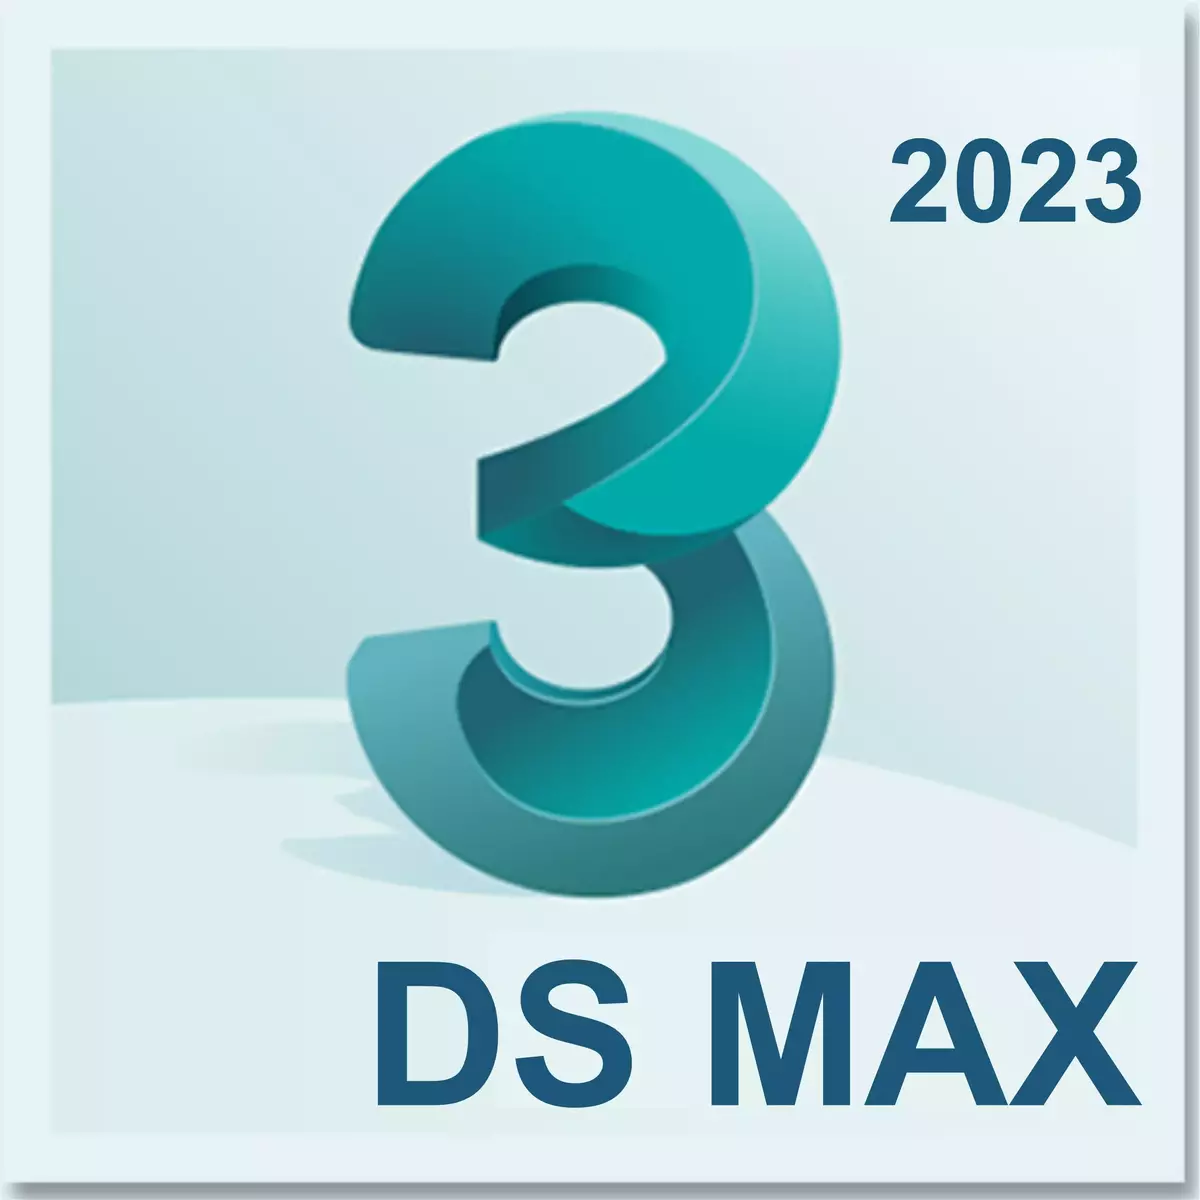 Download Autodesk 3DS Max 2023 Full Version